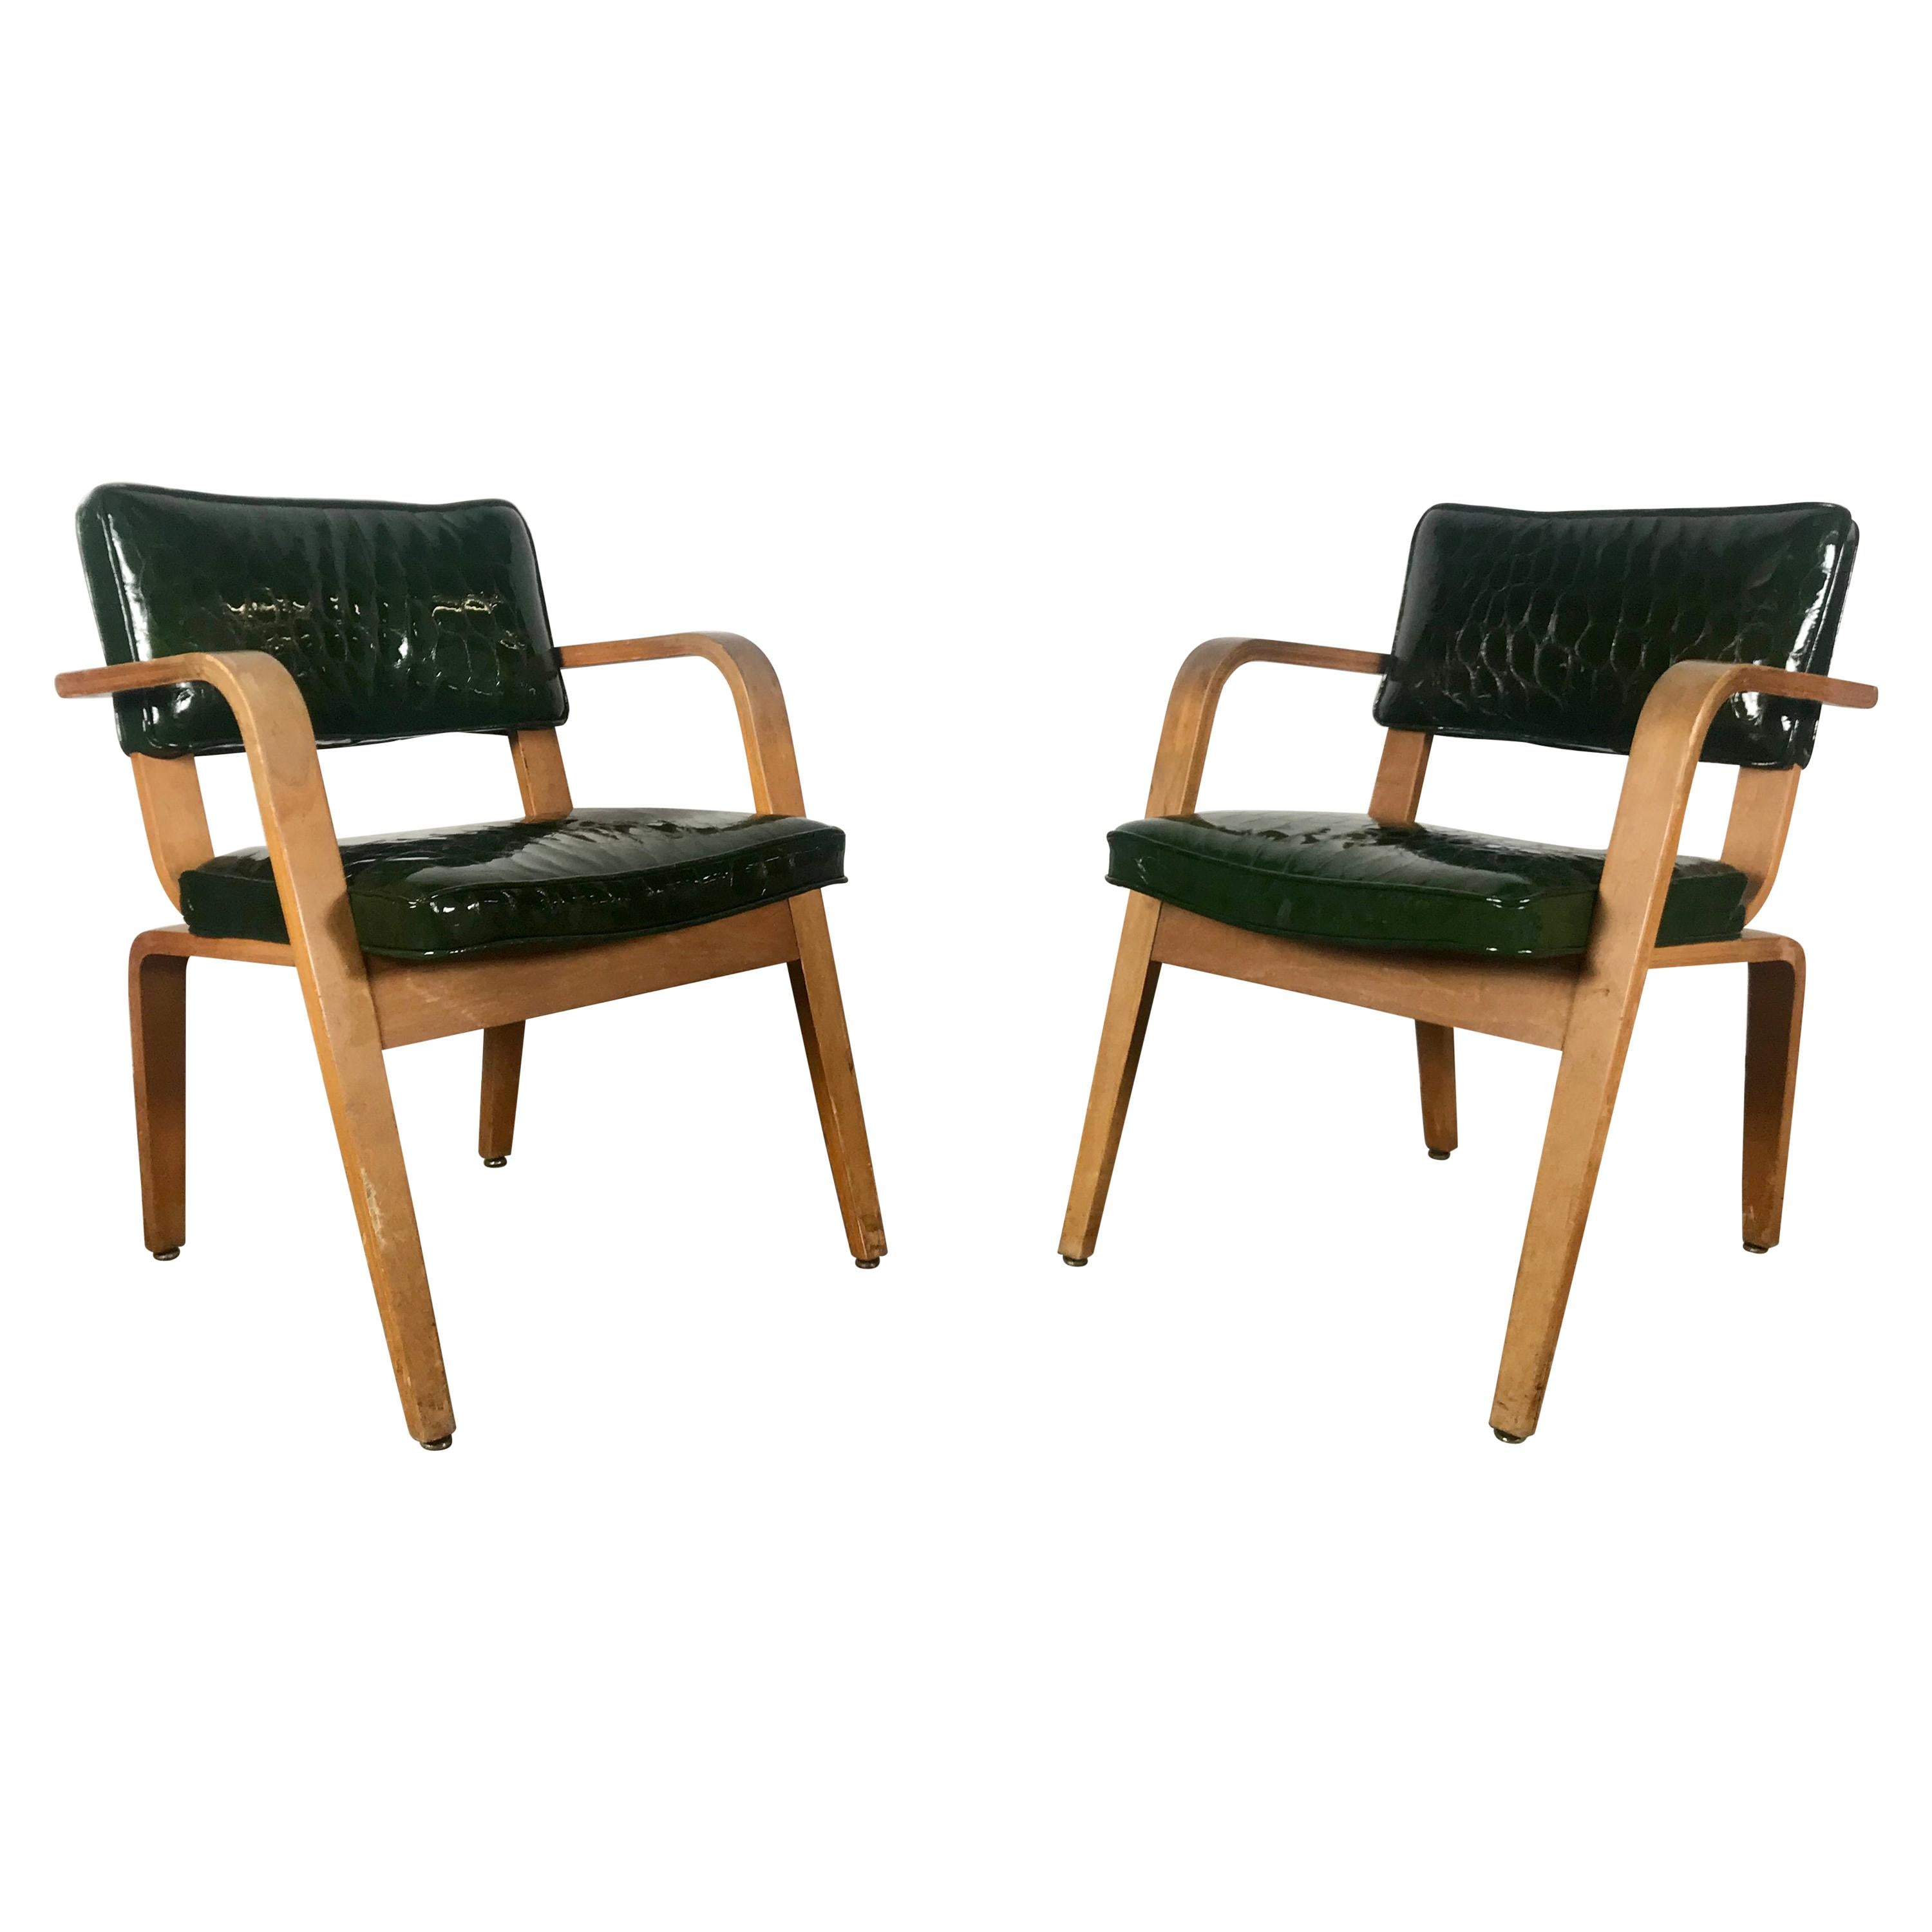 Pair of Modernist Thonet Bent Wood and Alligator Patent Leather Lounge Chairs